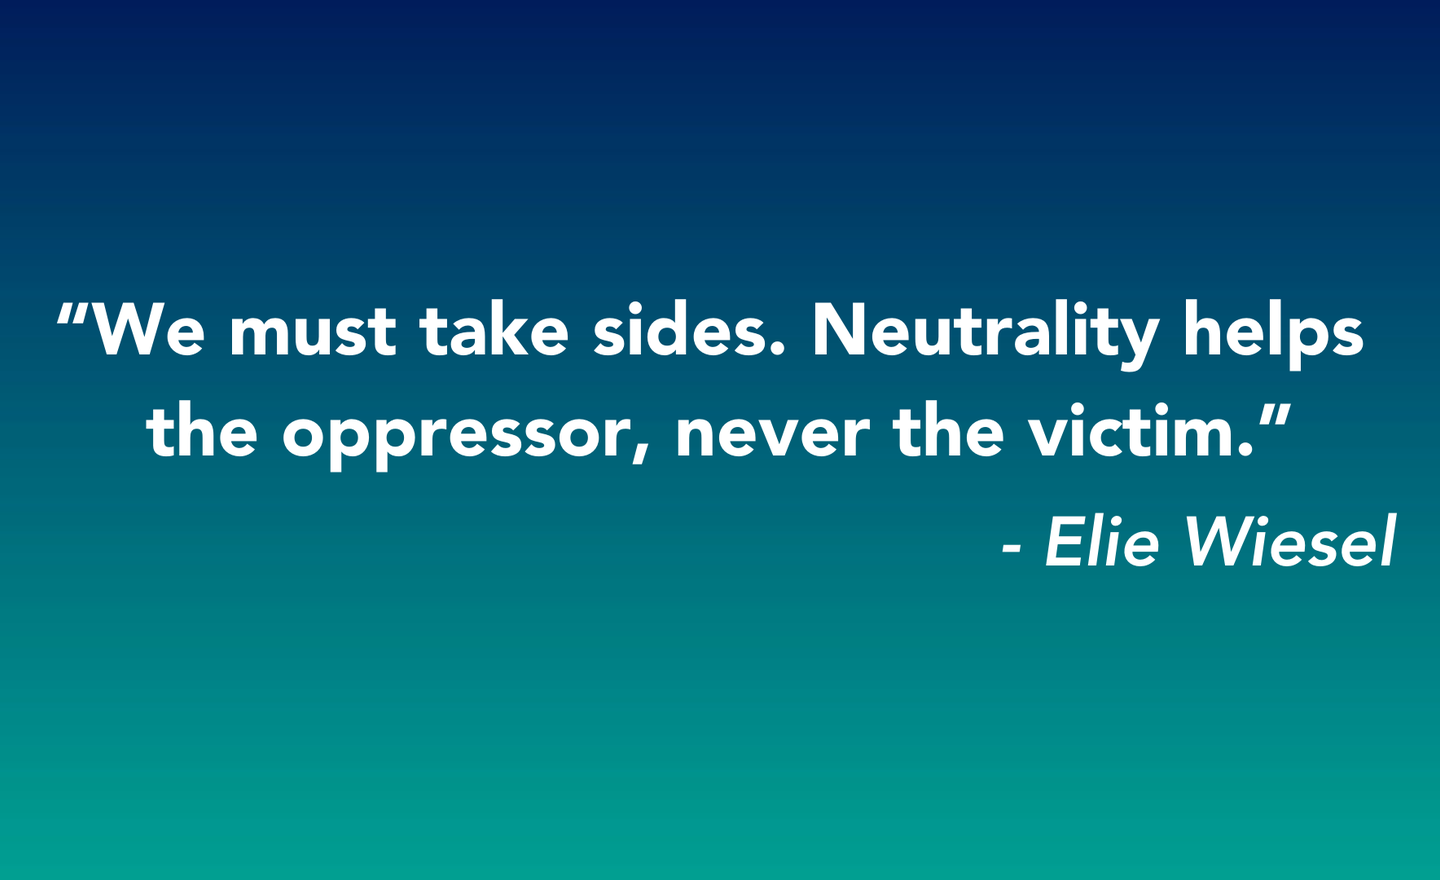 wiesel quote.png 1440x880 q85 crop subsampling 2 upscale (1)